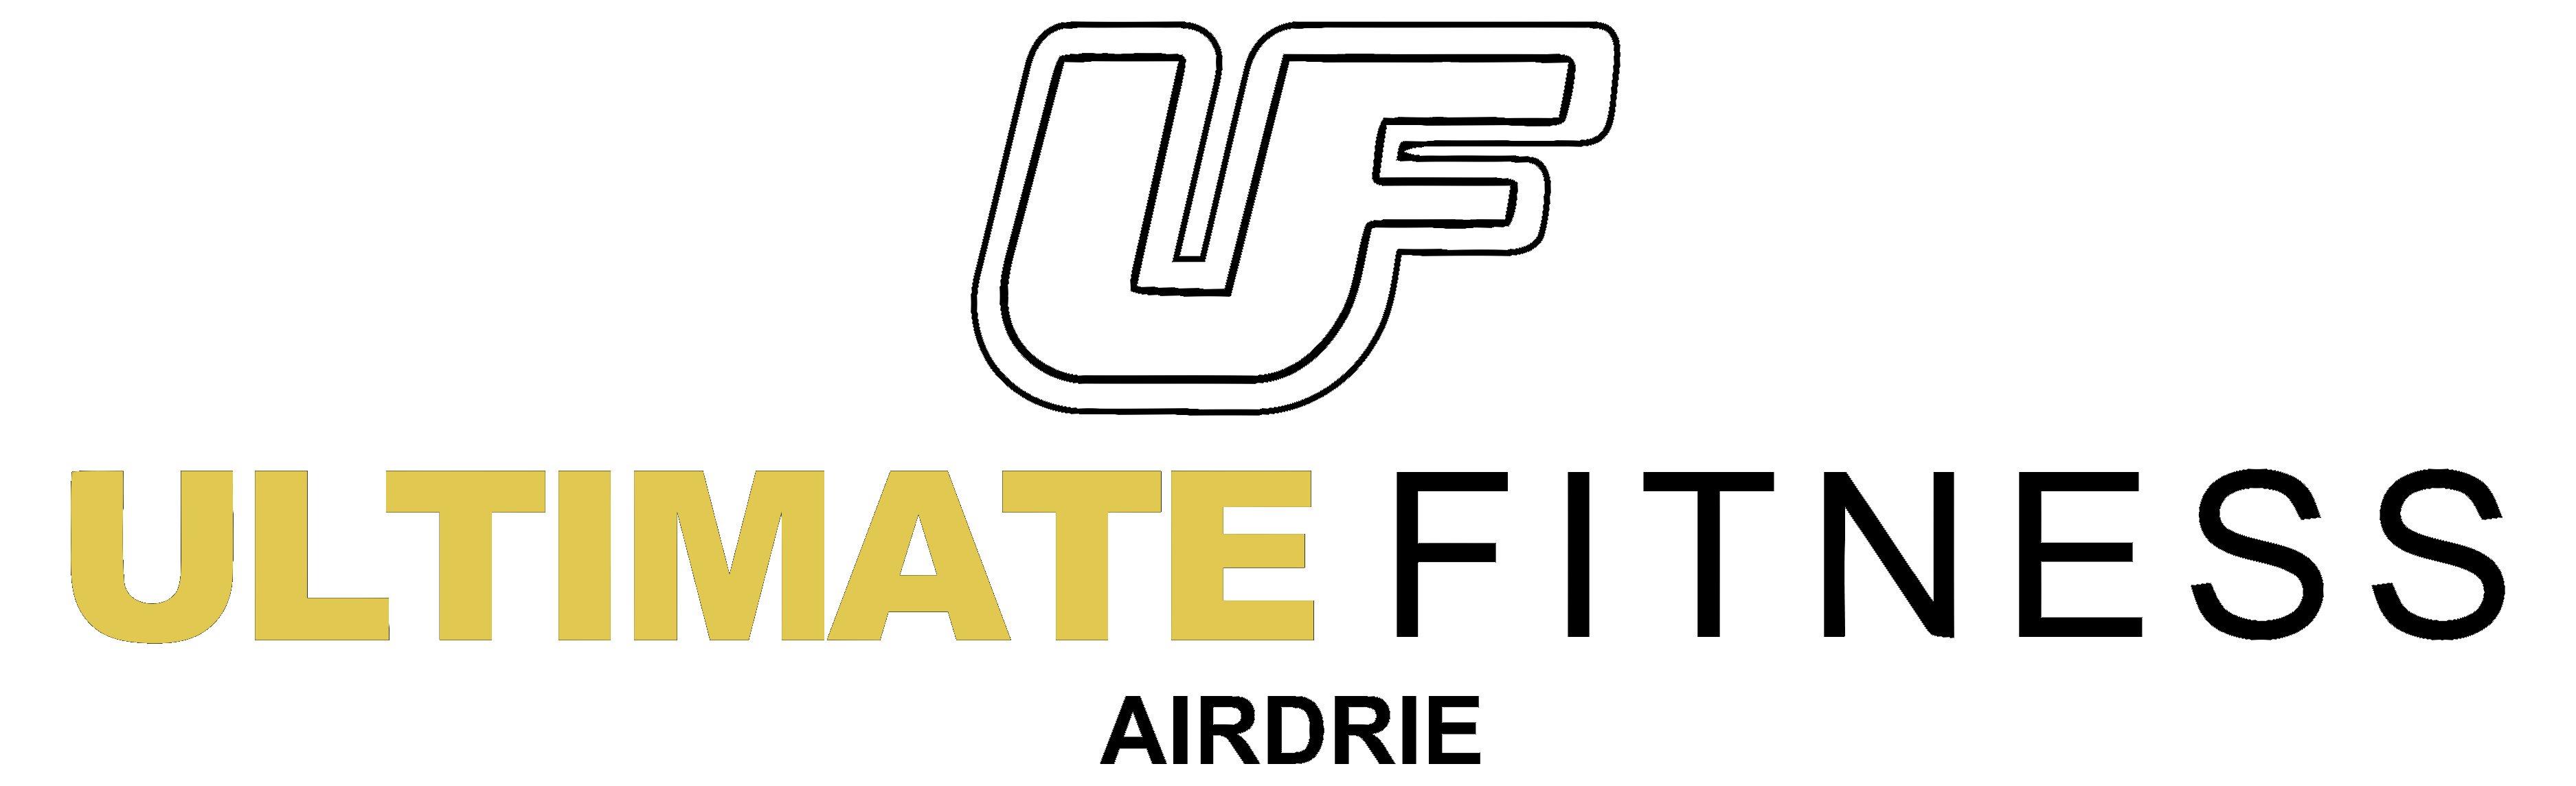 Ultimate Fitness Airdrie – We help people like you, look better